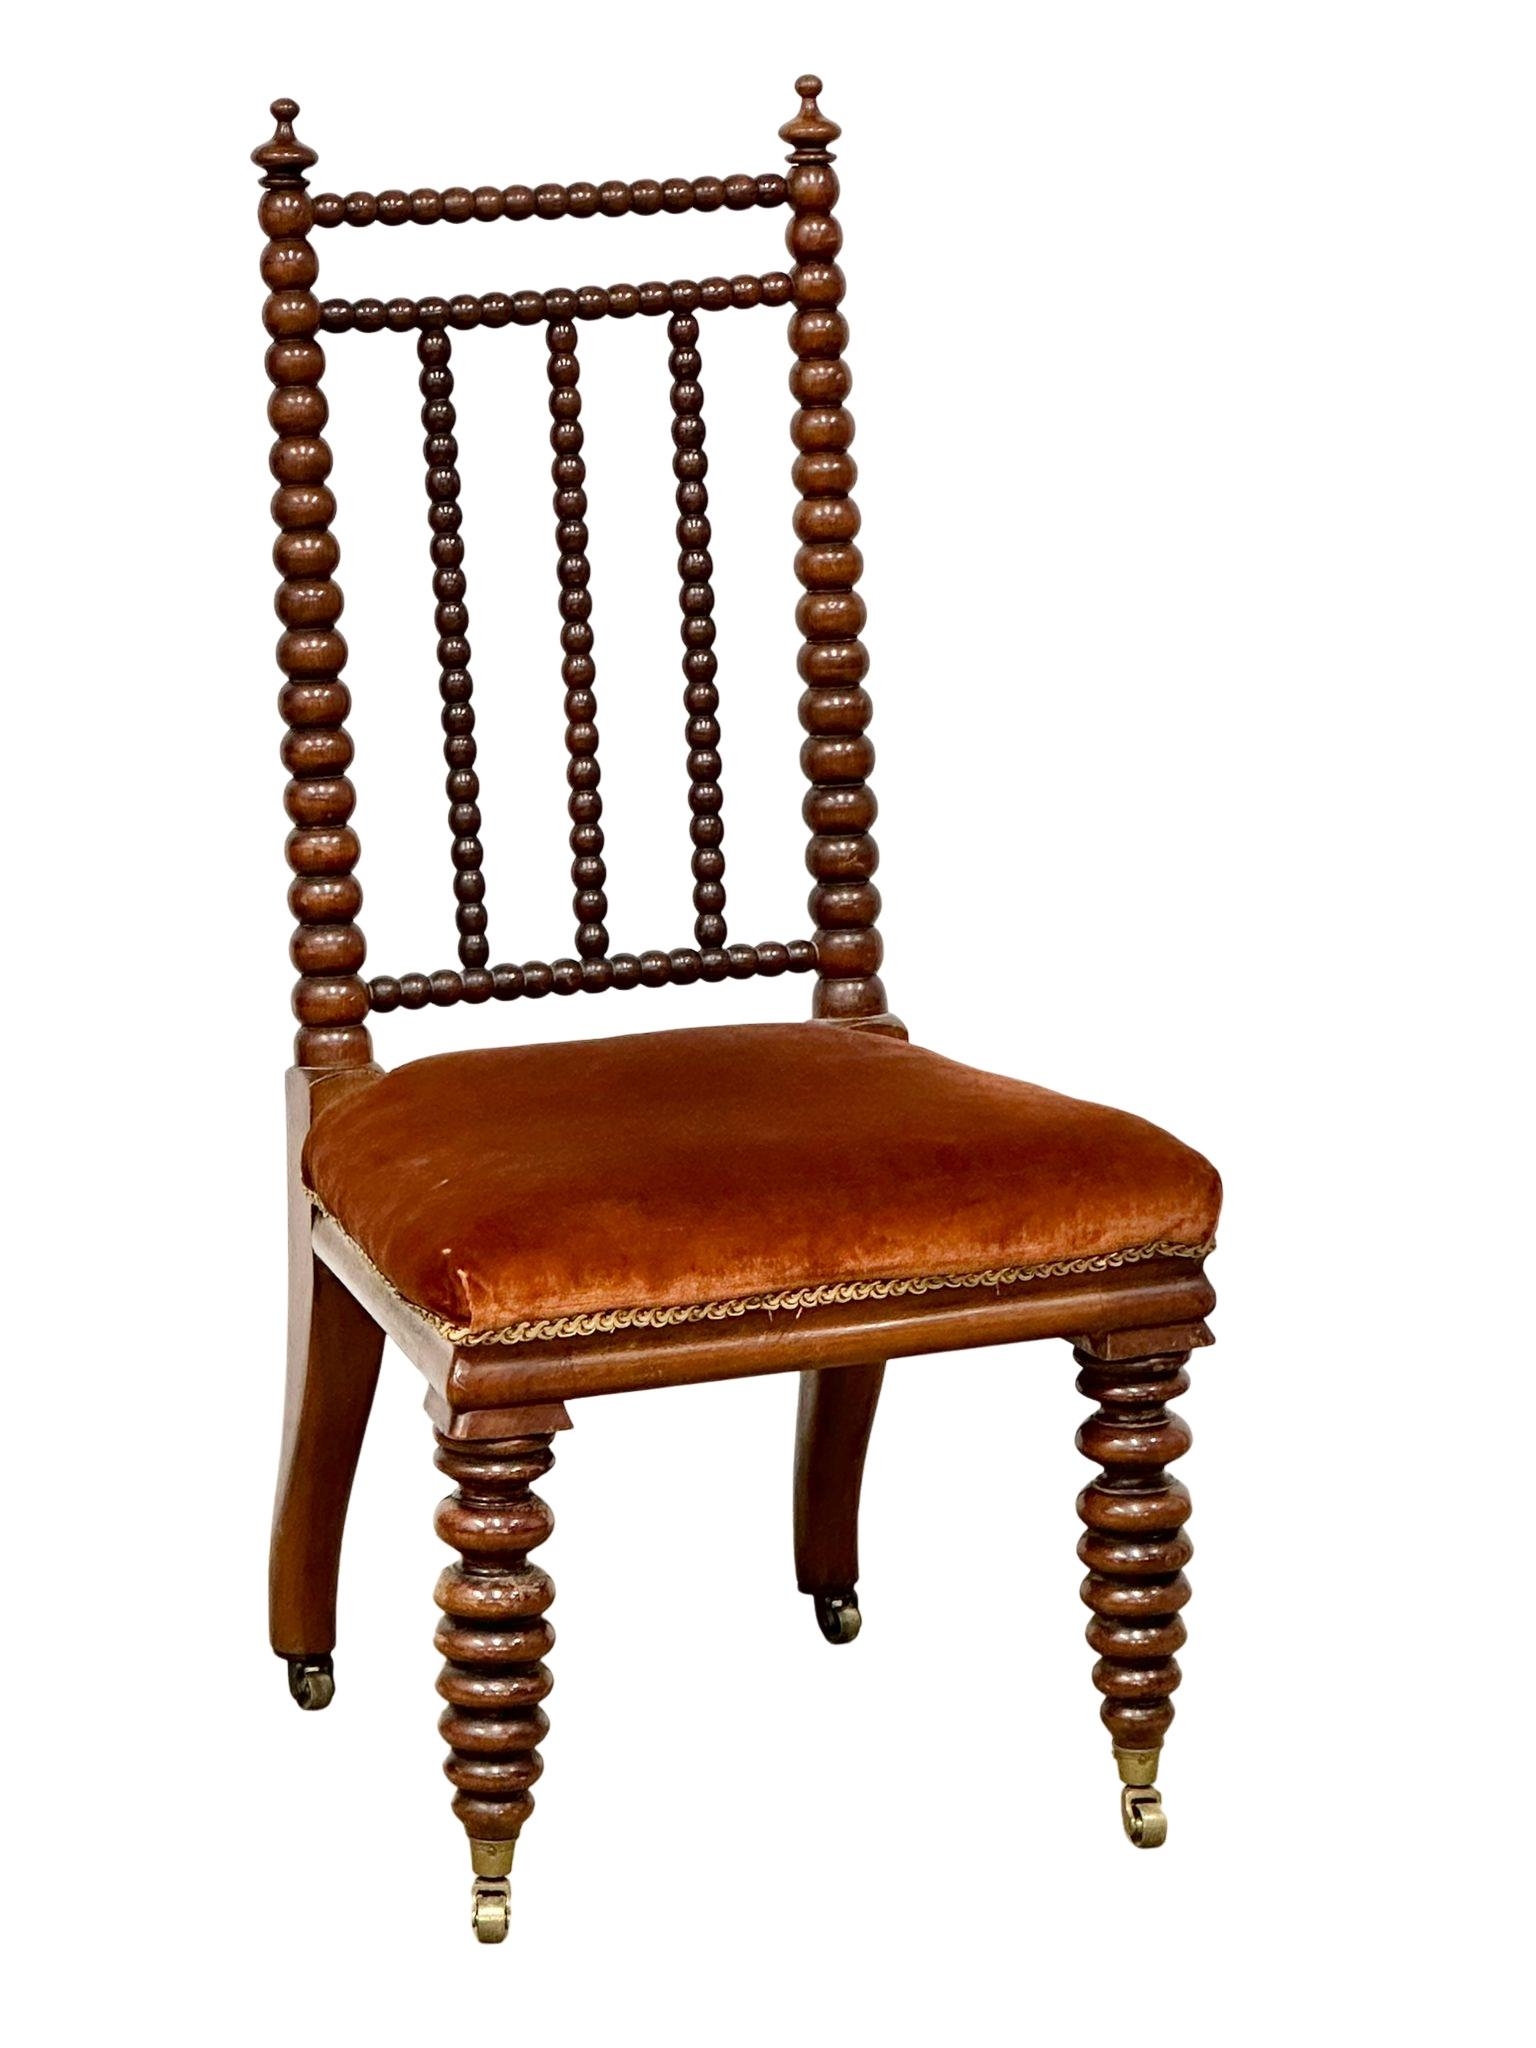 A Victorian walnut Bobbin Turn side chair on brass cup casters, circa 1850-70s.